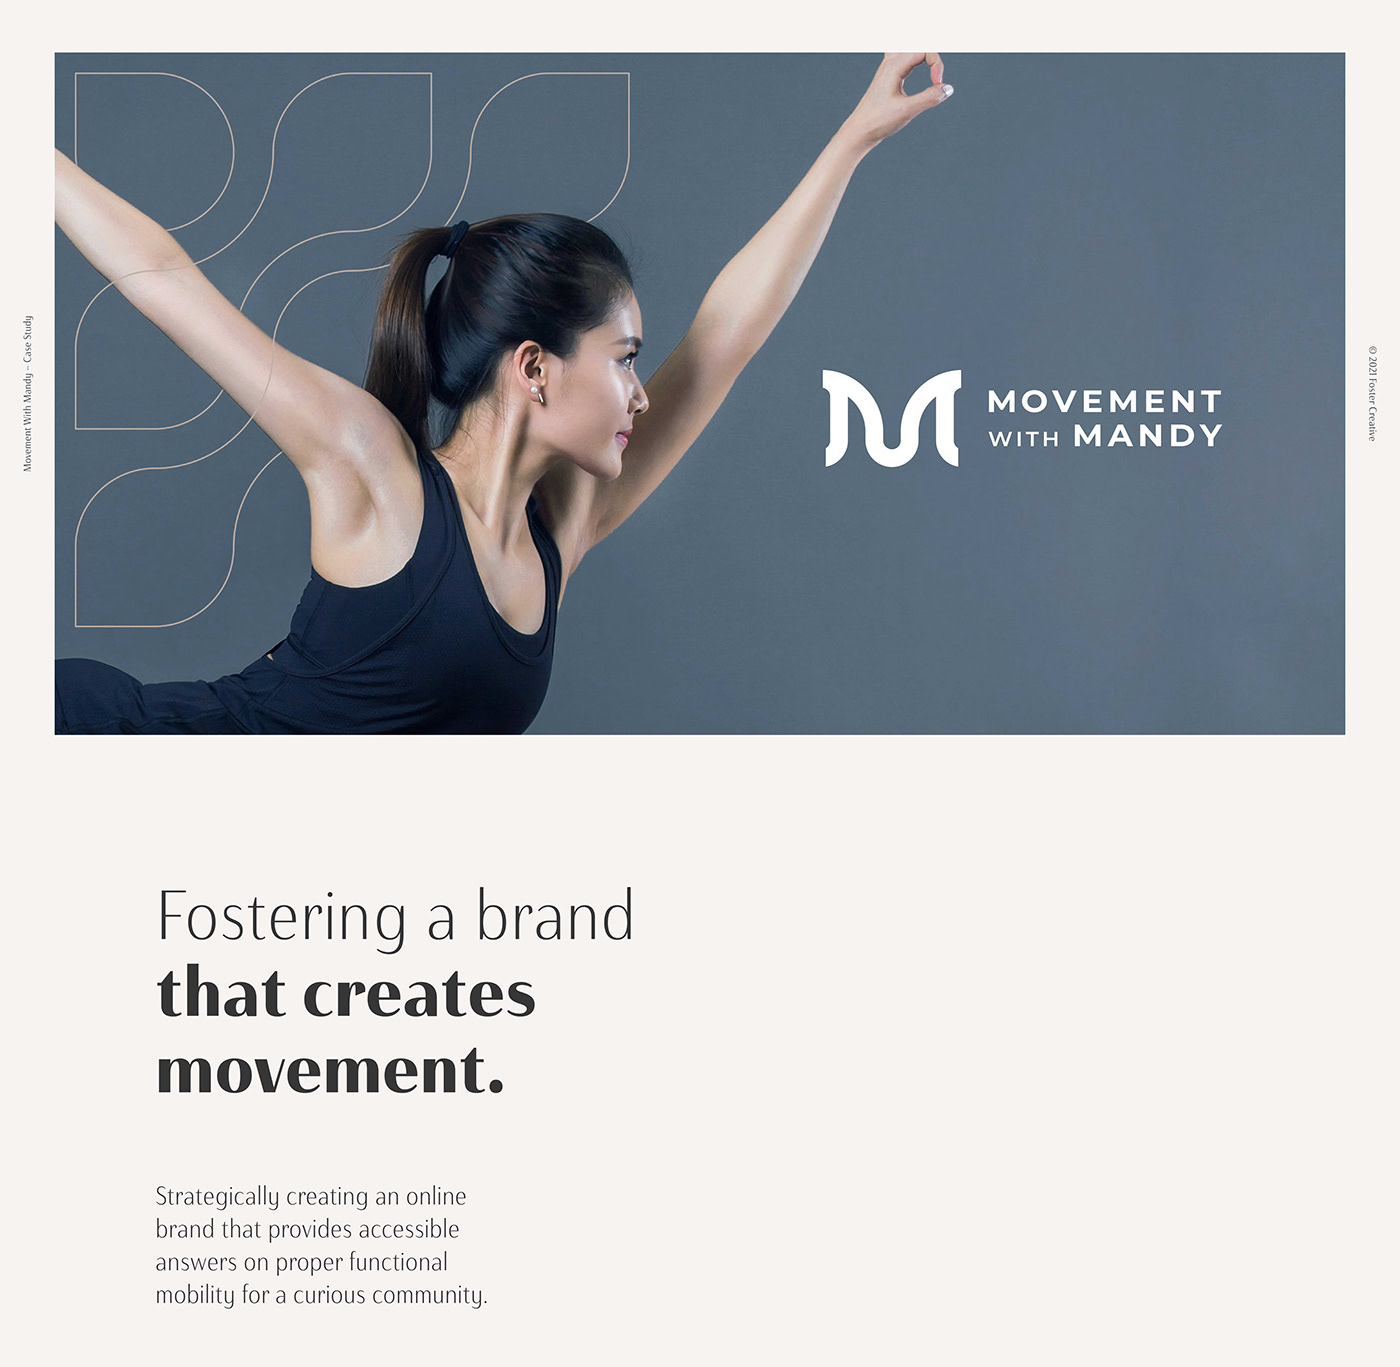 Hero image which includes visual elements from the brand Movement with Mandy to showcase consistency